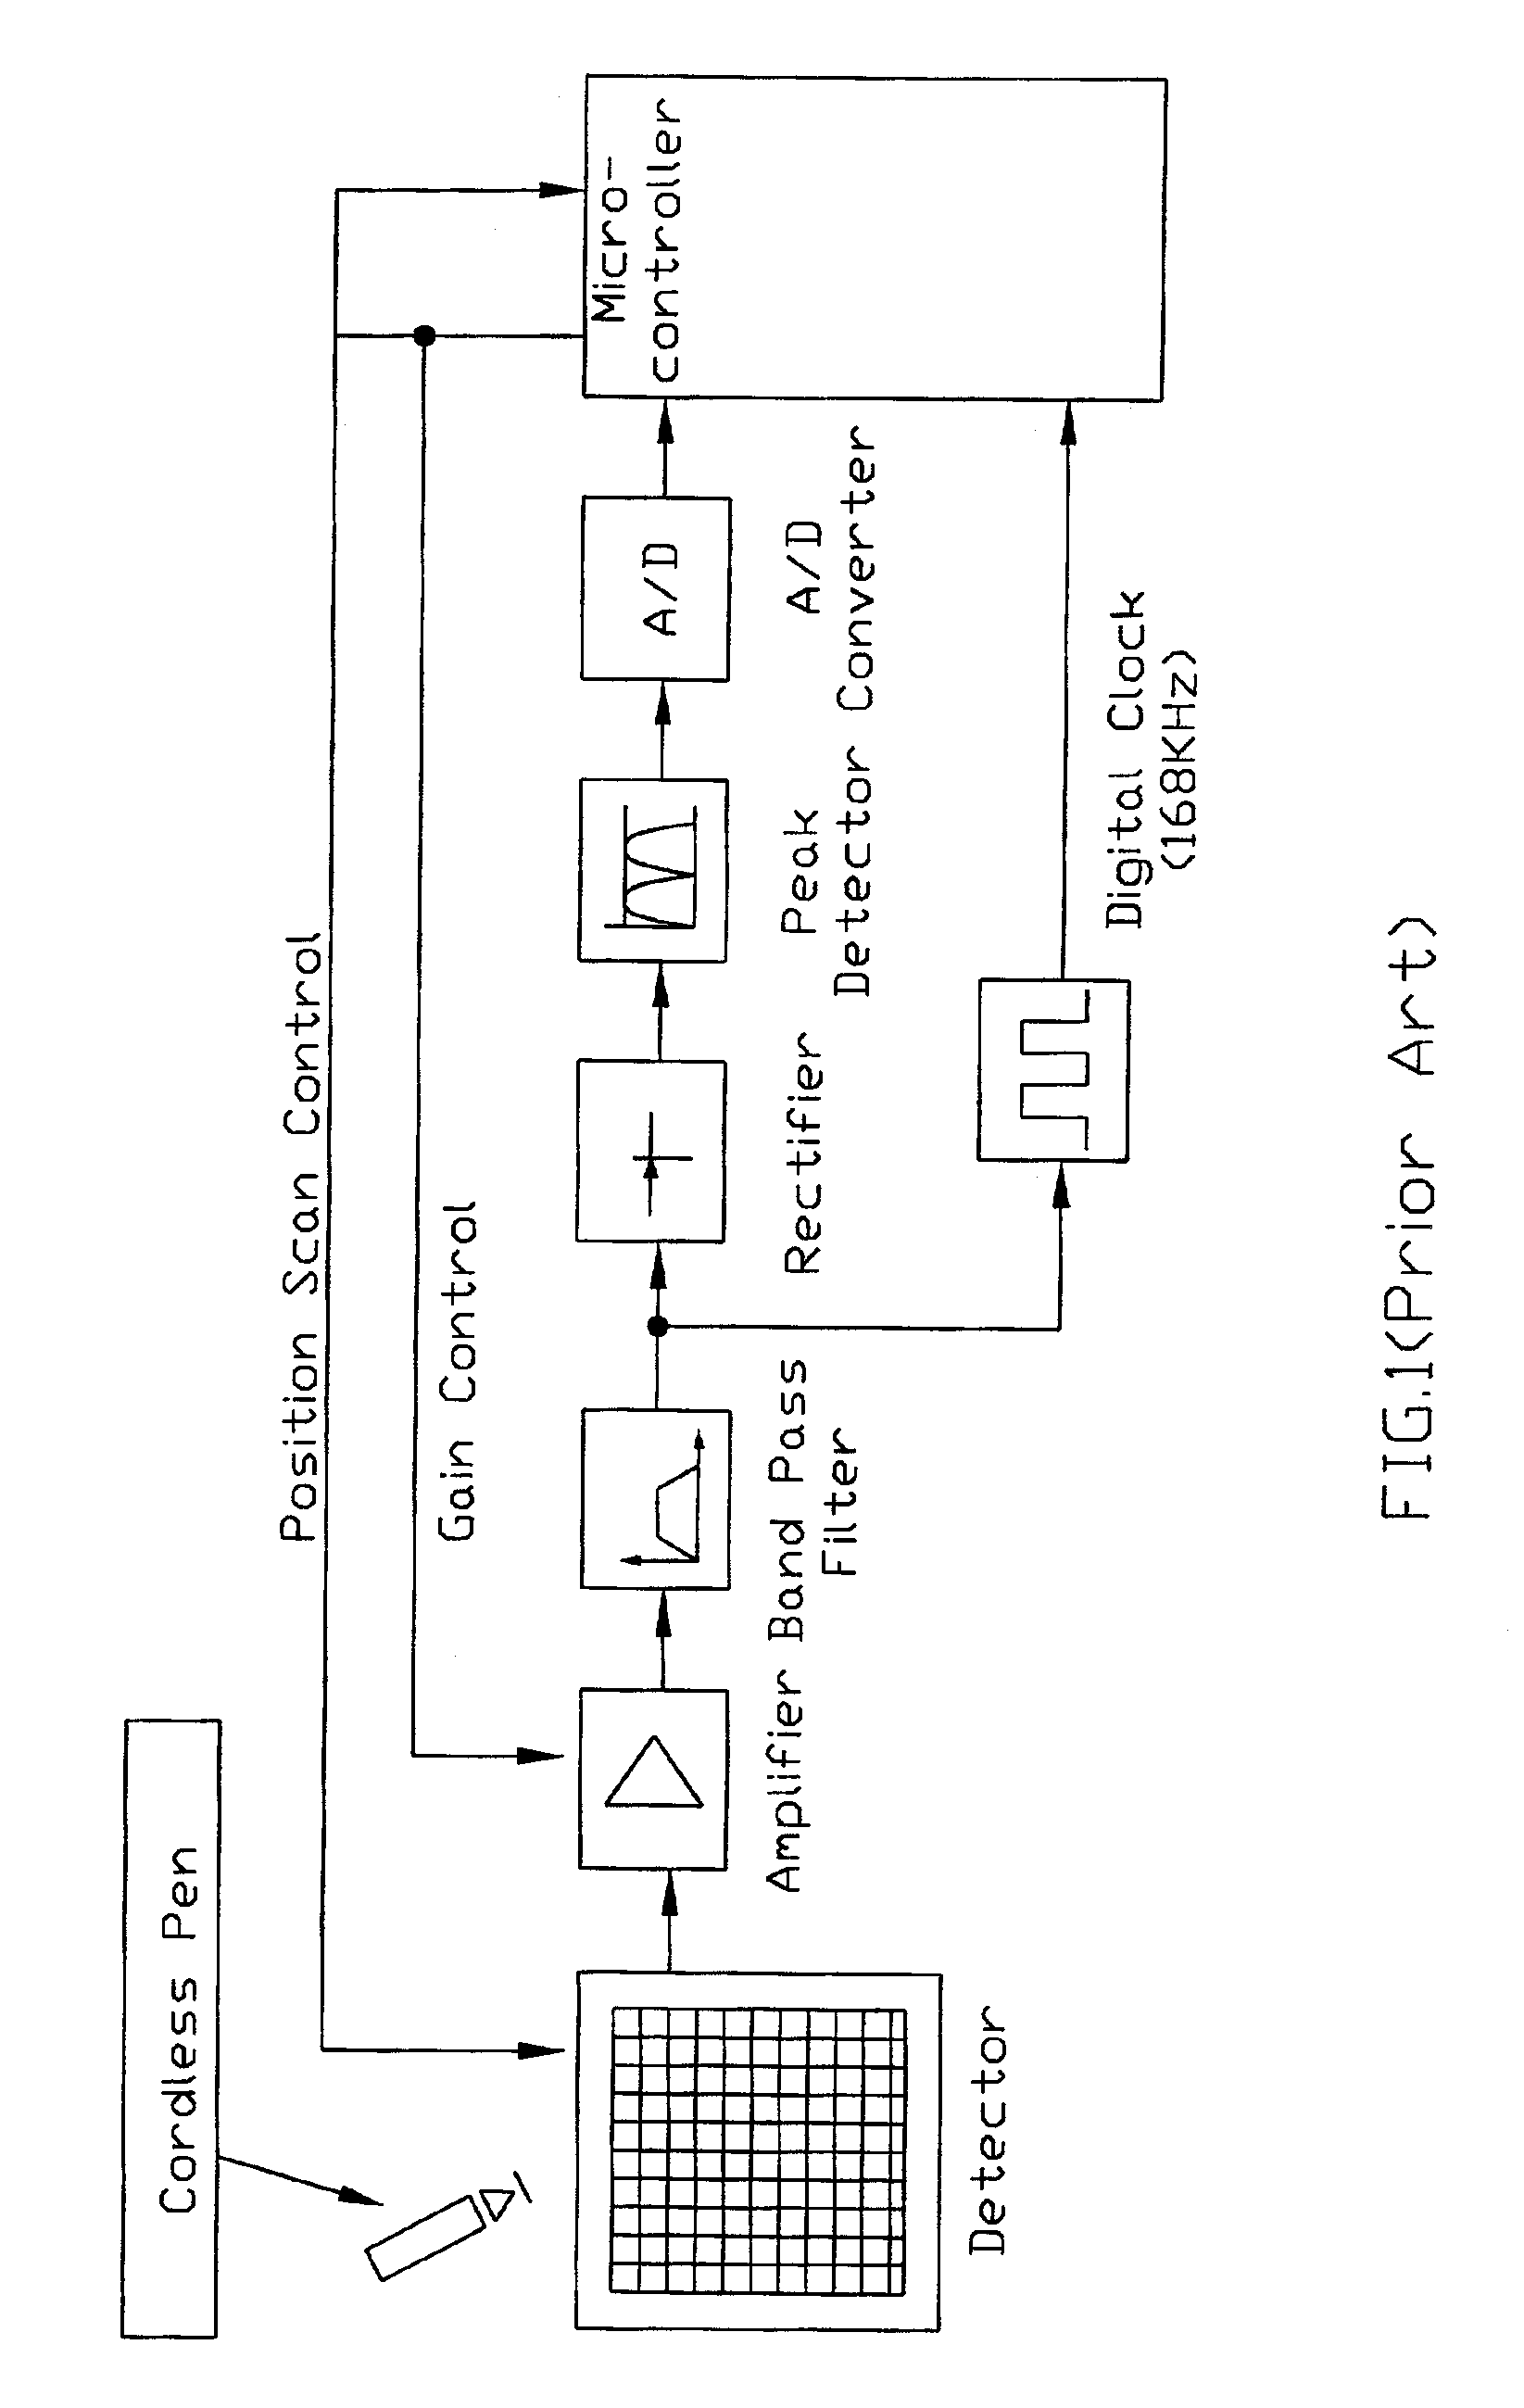 Application specific integrated circuit (ASIC) of the electromagnetic-induction system